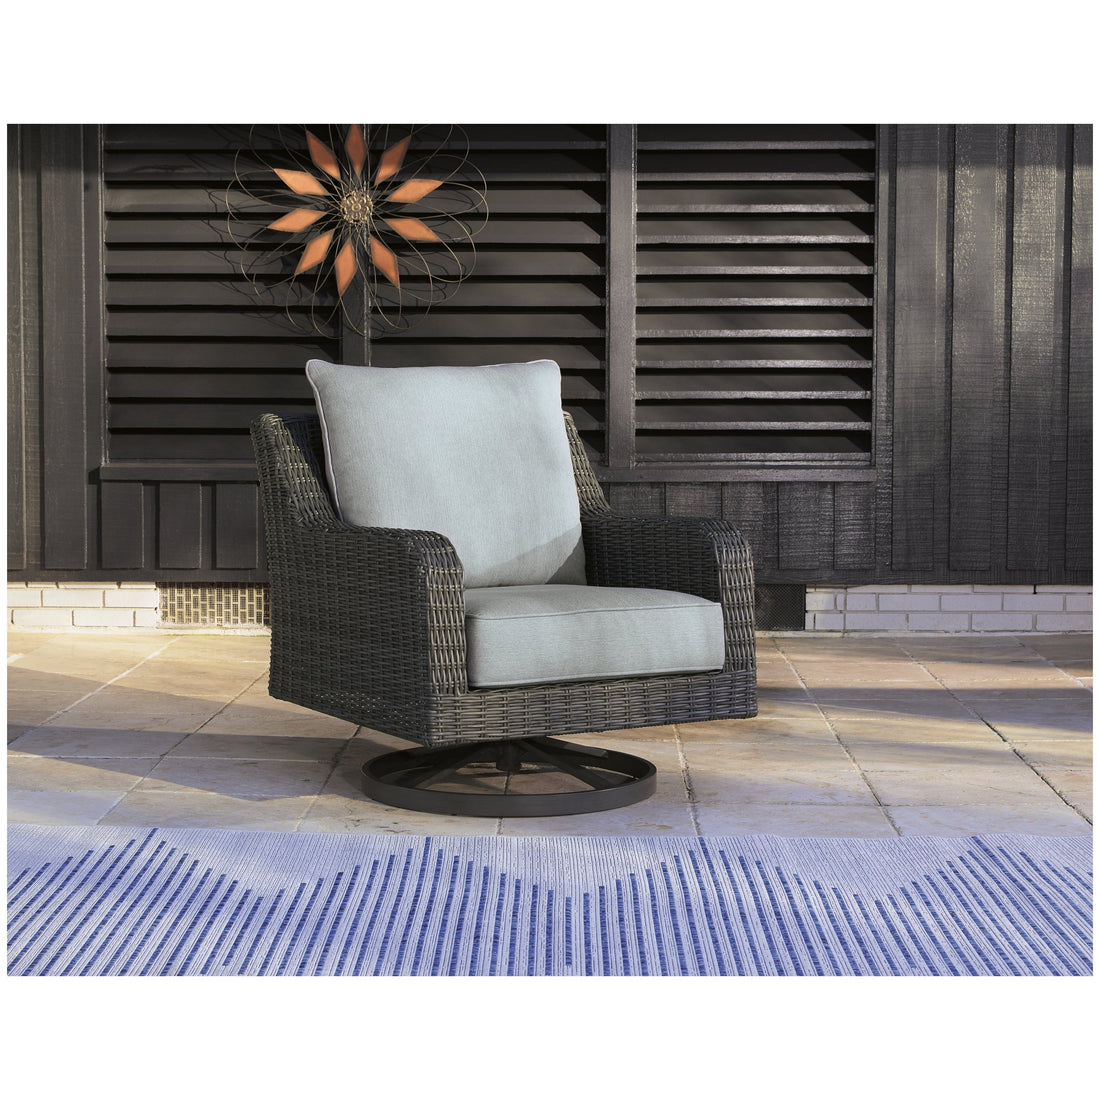 Elite Park Outdoor Swivel Lounge with Cushion Ash-P518-821